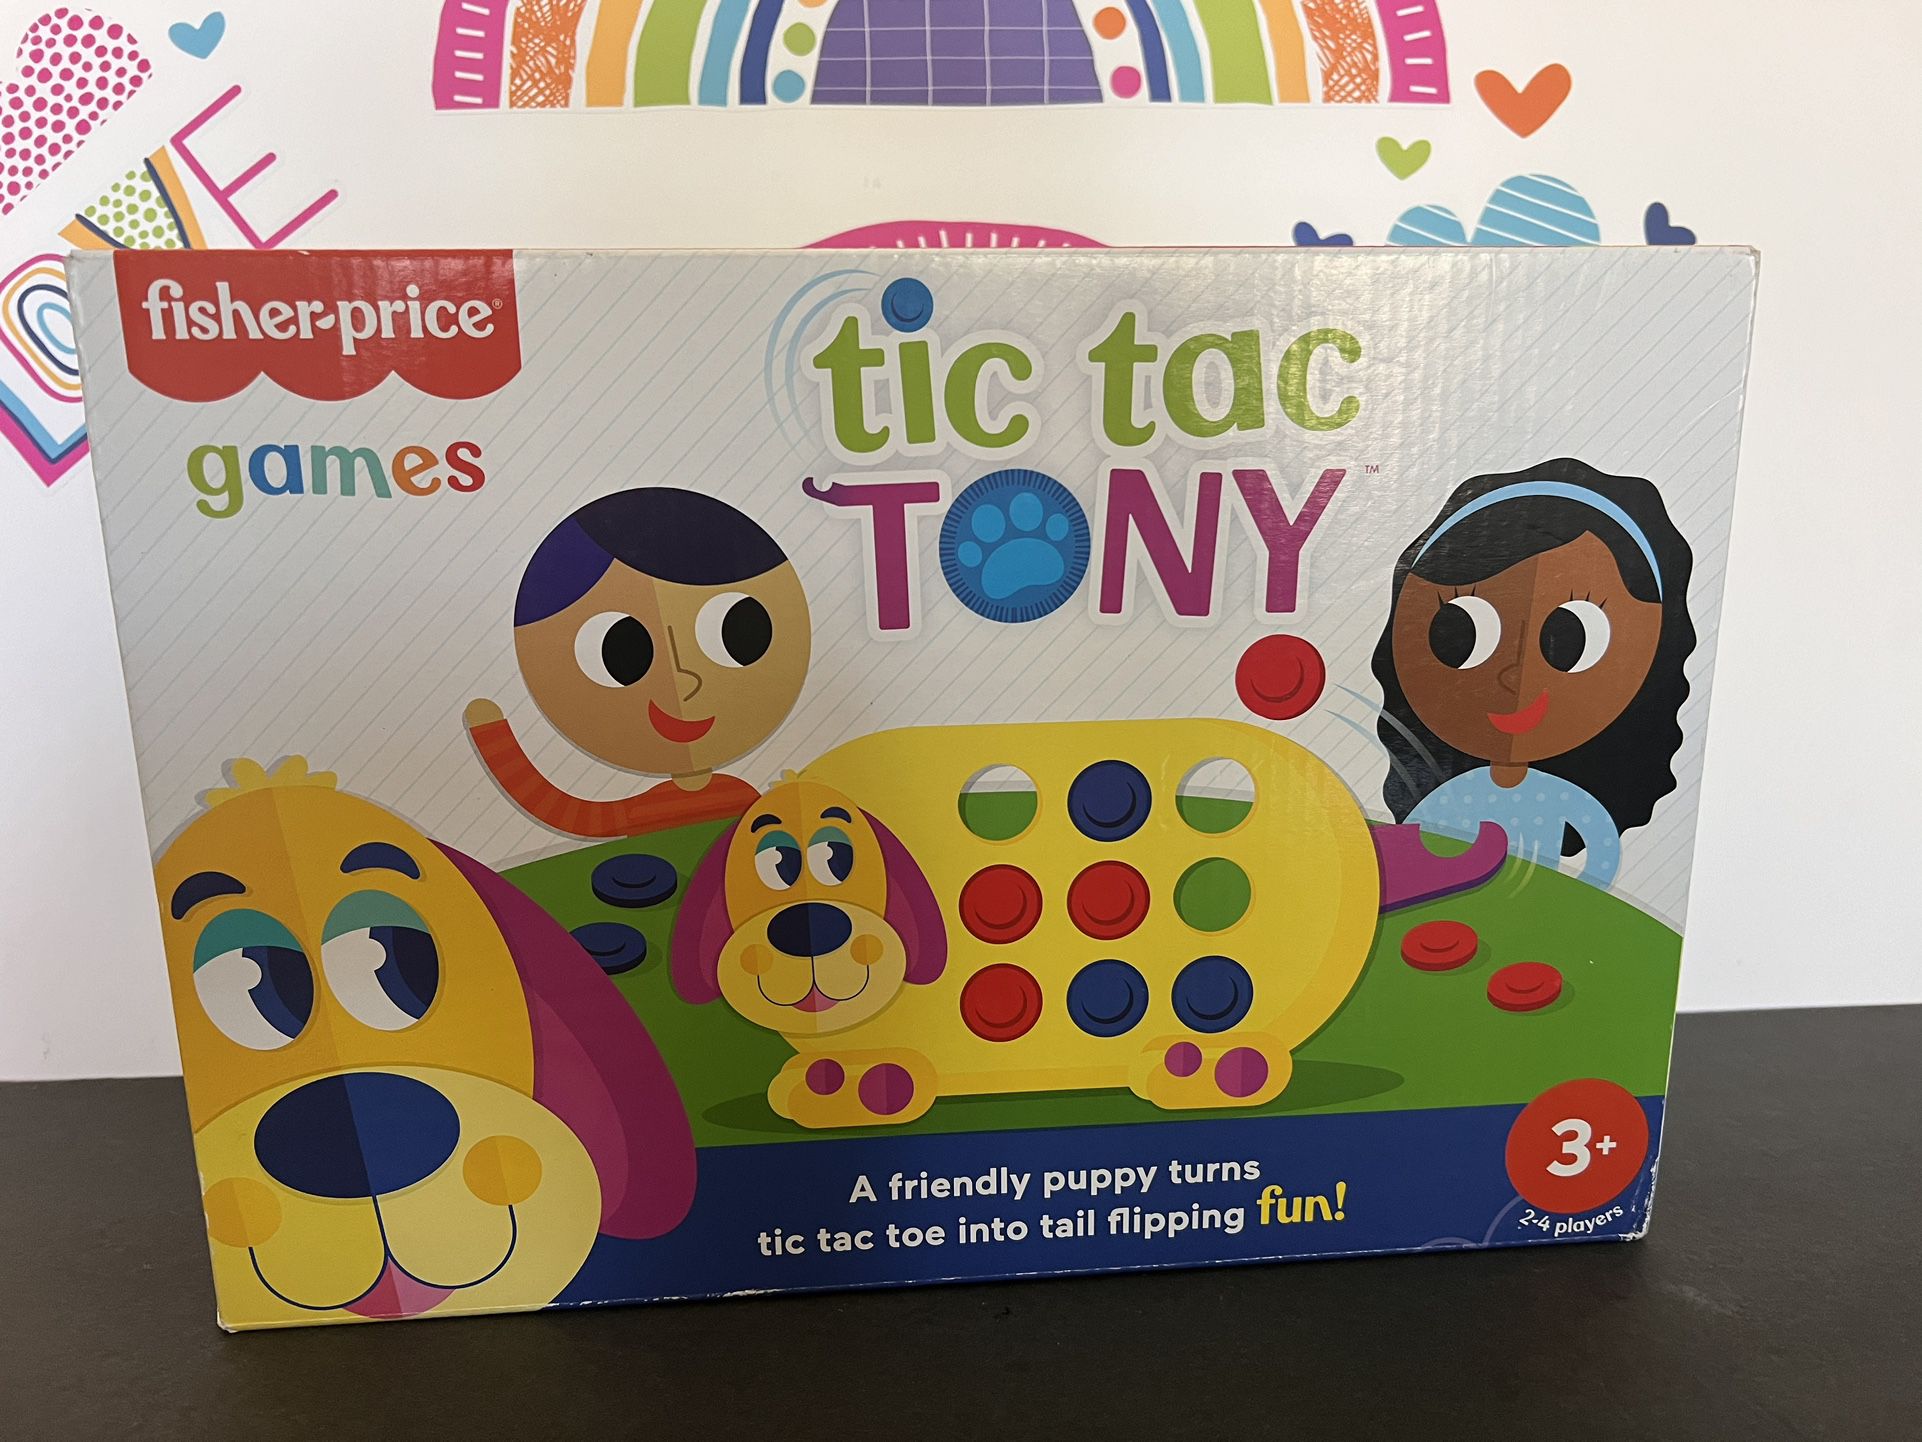 FISHER PRICE GAME - TIC TAC TONY - AGES 3* - BRAND NEW